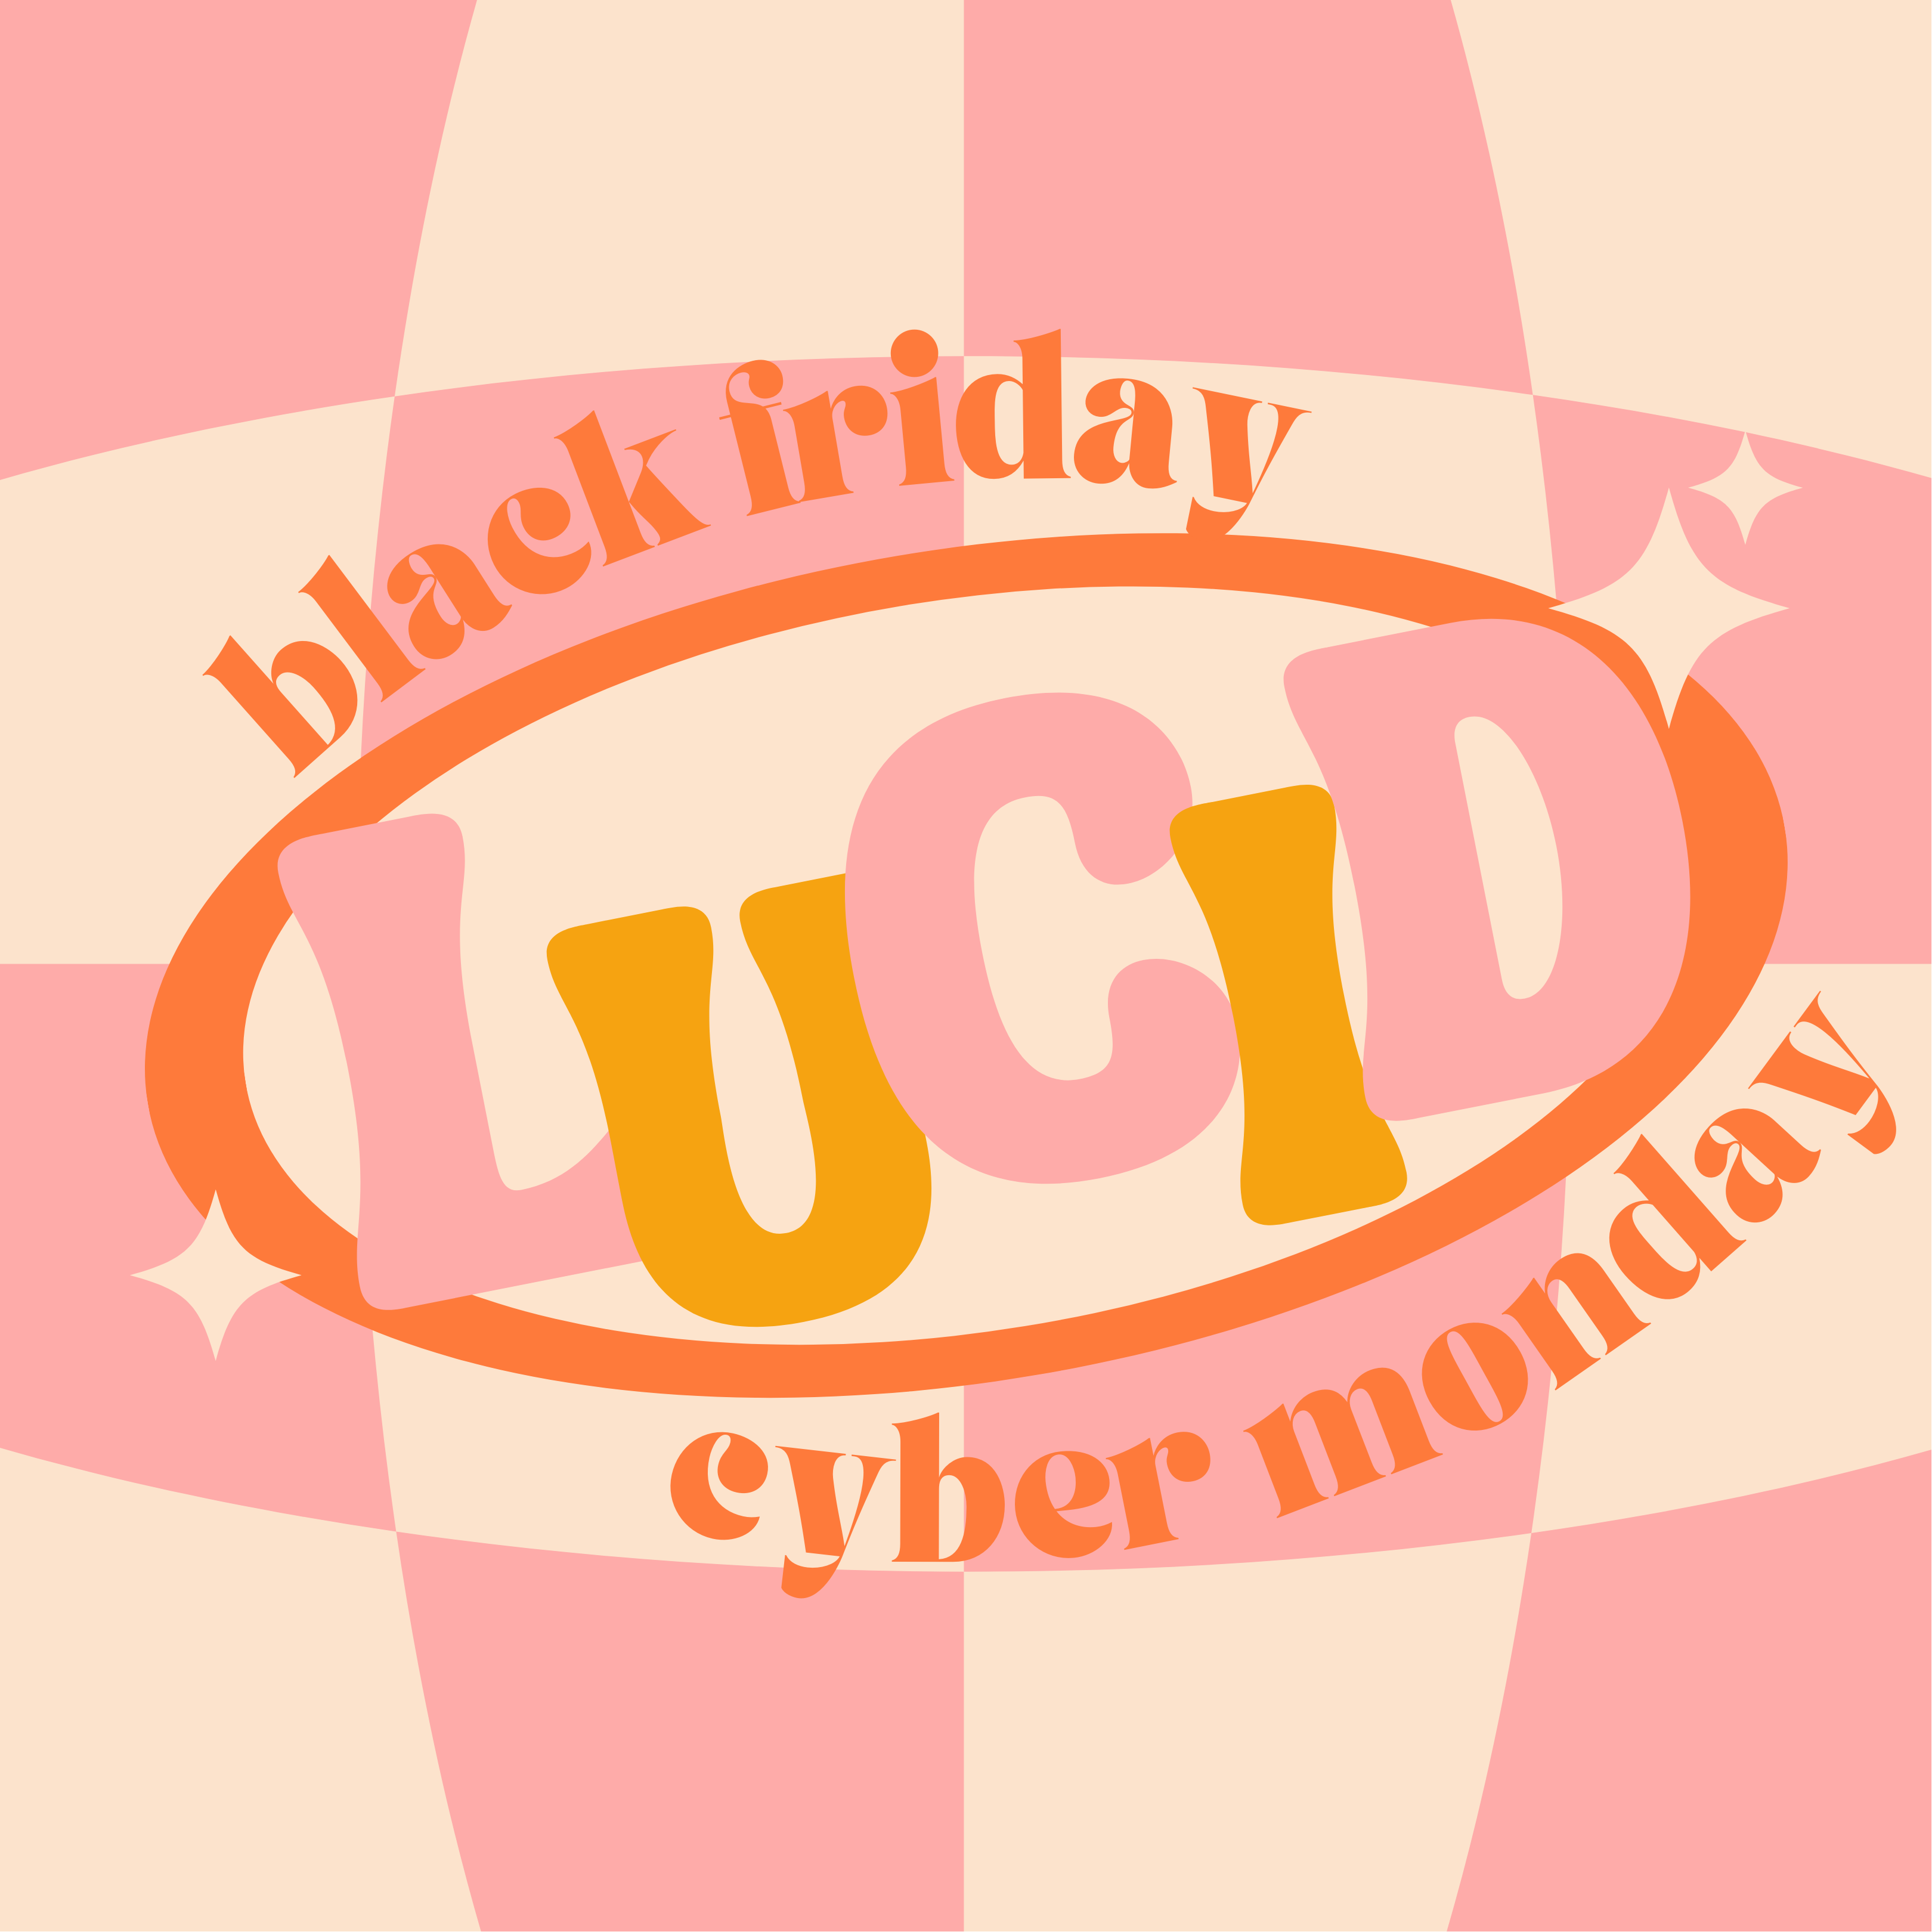 Lucid's Black Friday + Cyber Monday Sale!